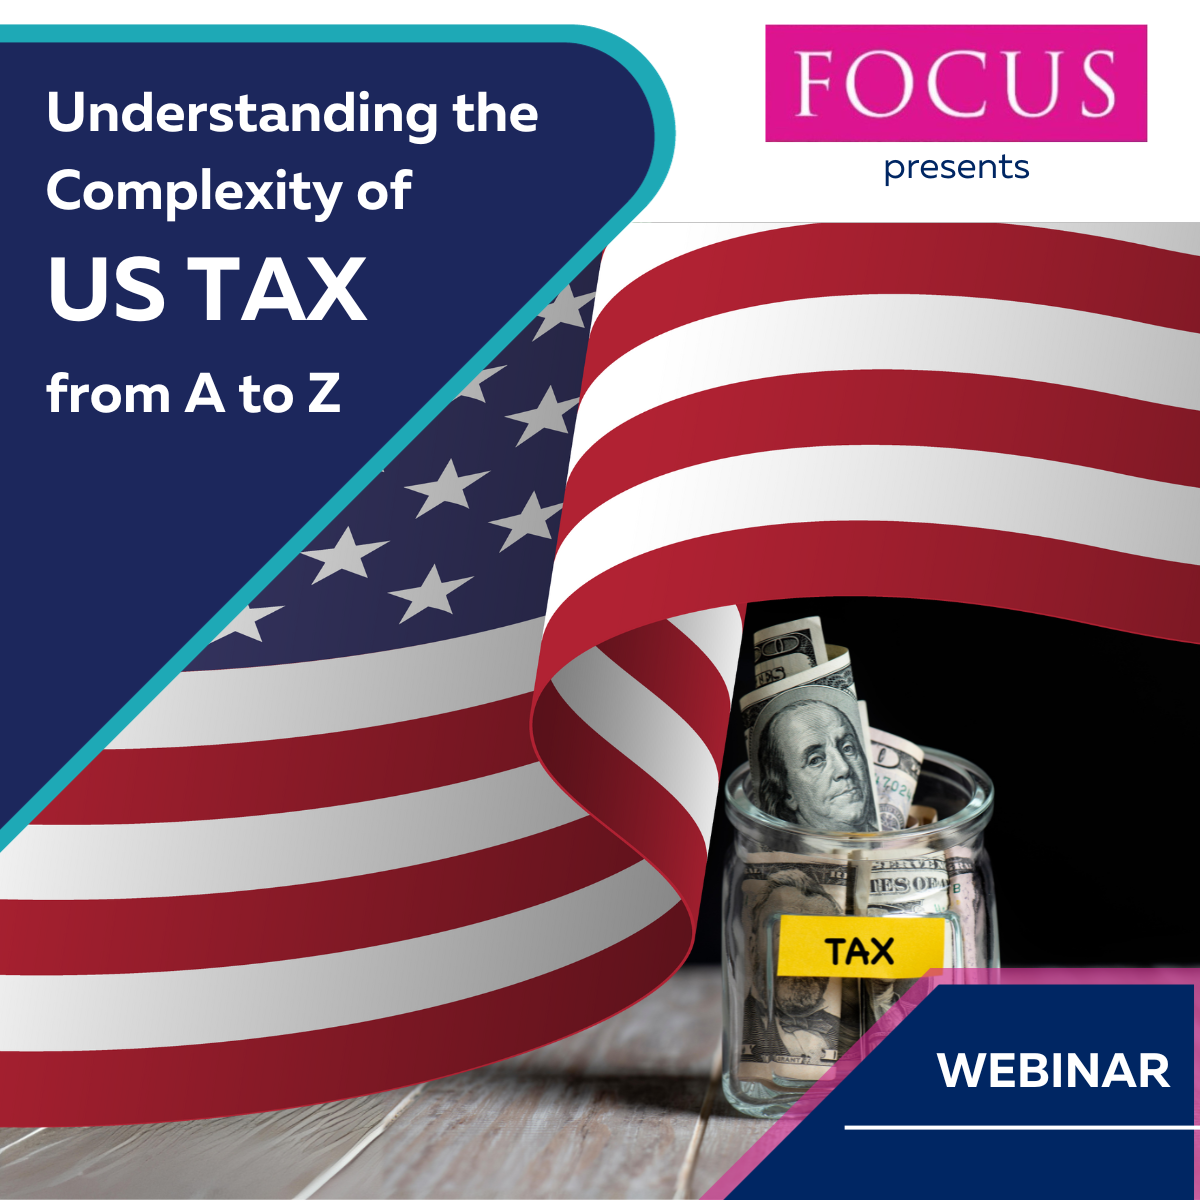 FOCUS Webinar: US TAX for expats in the UK